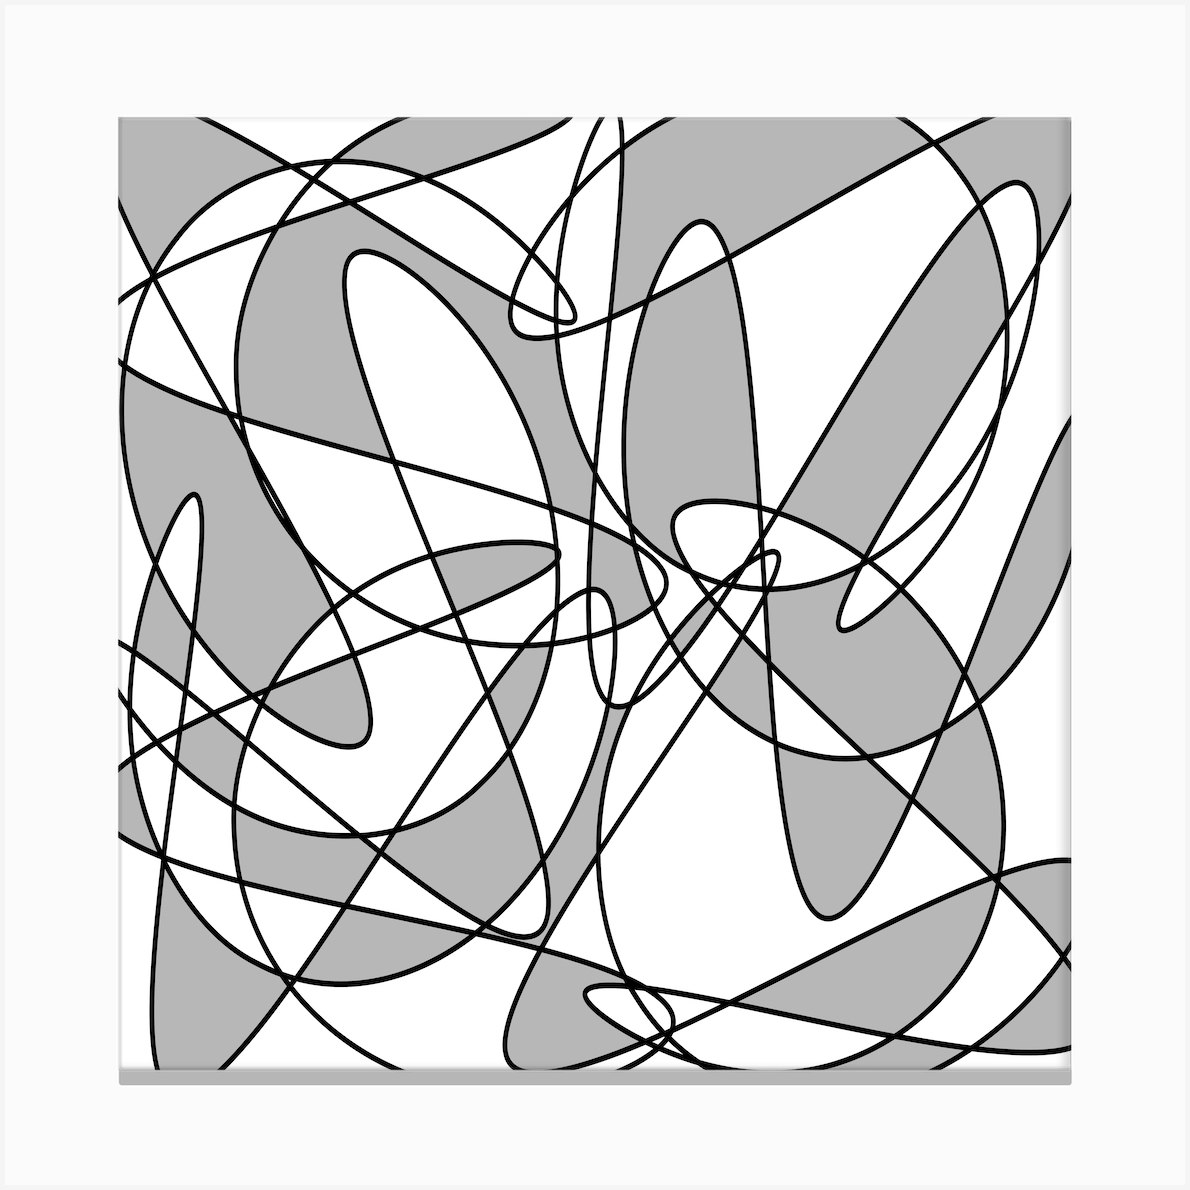 abstract swirls line drawing